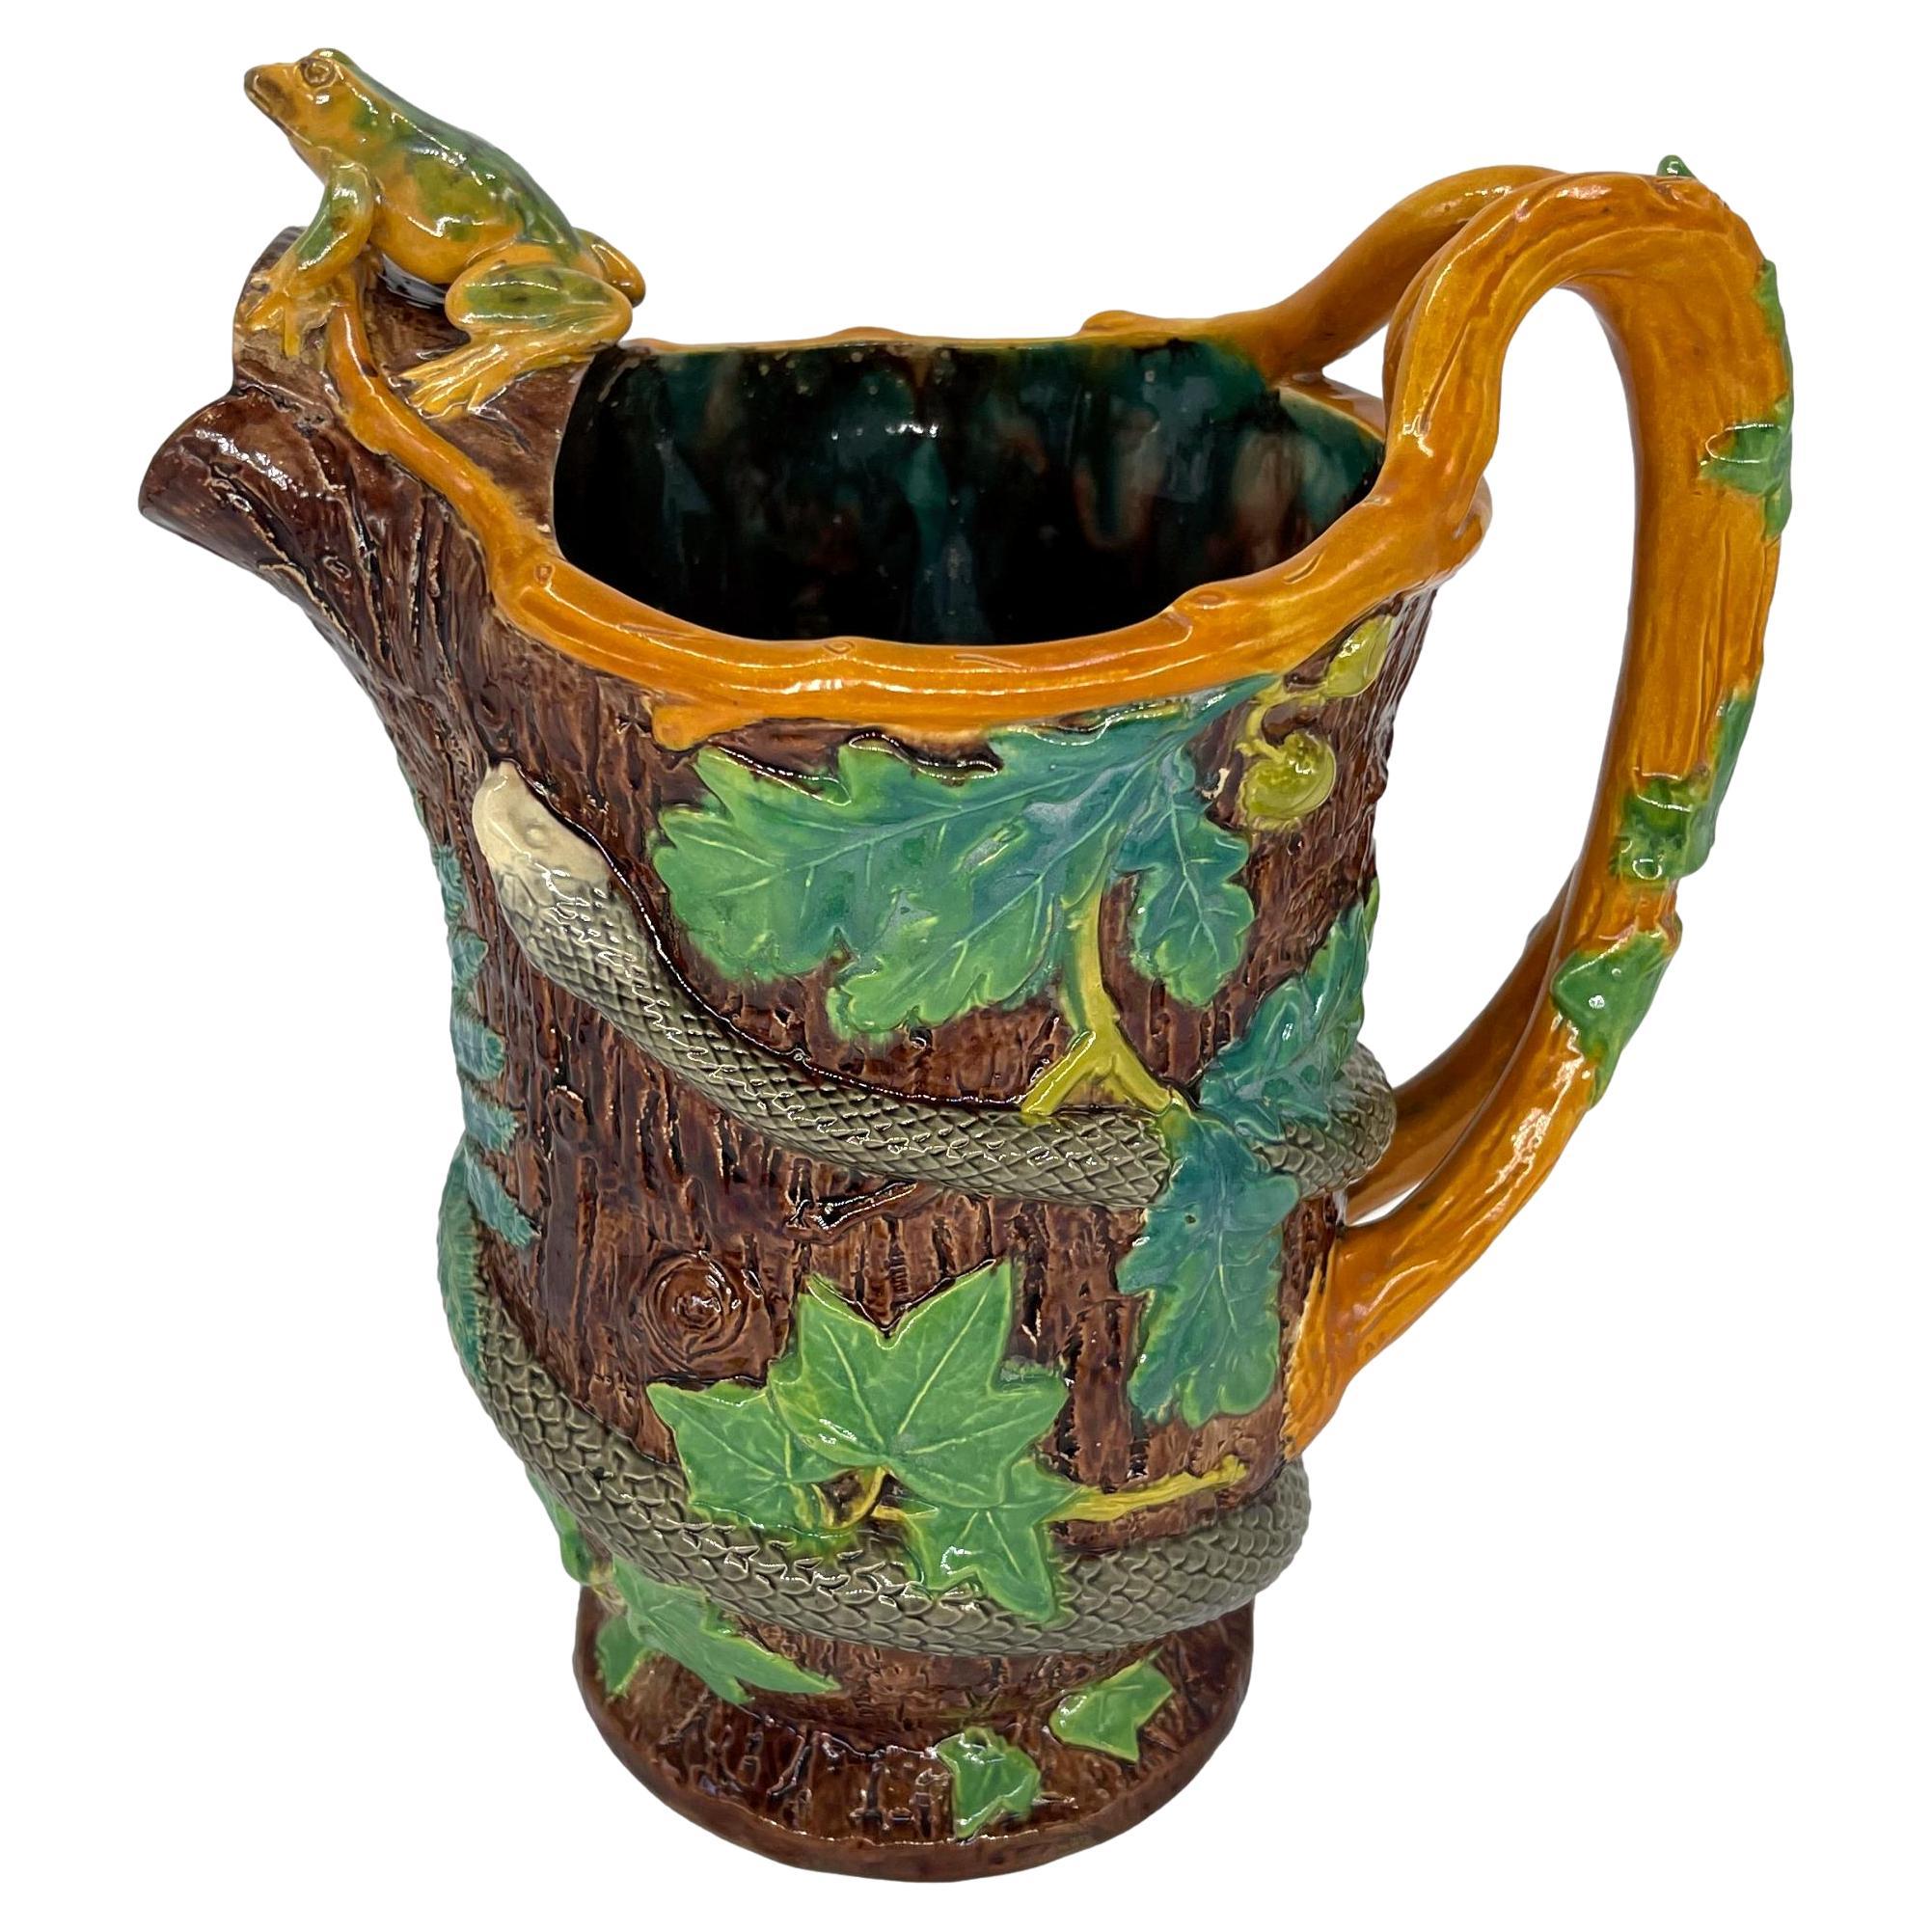 A Samuel Alcock Majolica Pitcher, the body molded as a tree trunk with ferns, oak leaves, acorns, and ivy, entwined by a high relief-molded and naturalistically glazed snake, the handle formed as crossed branches glazed in yellow ocher with